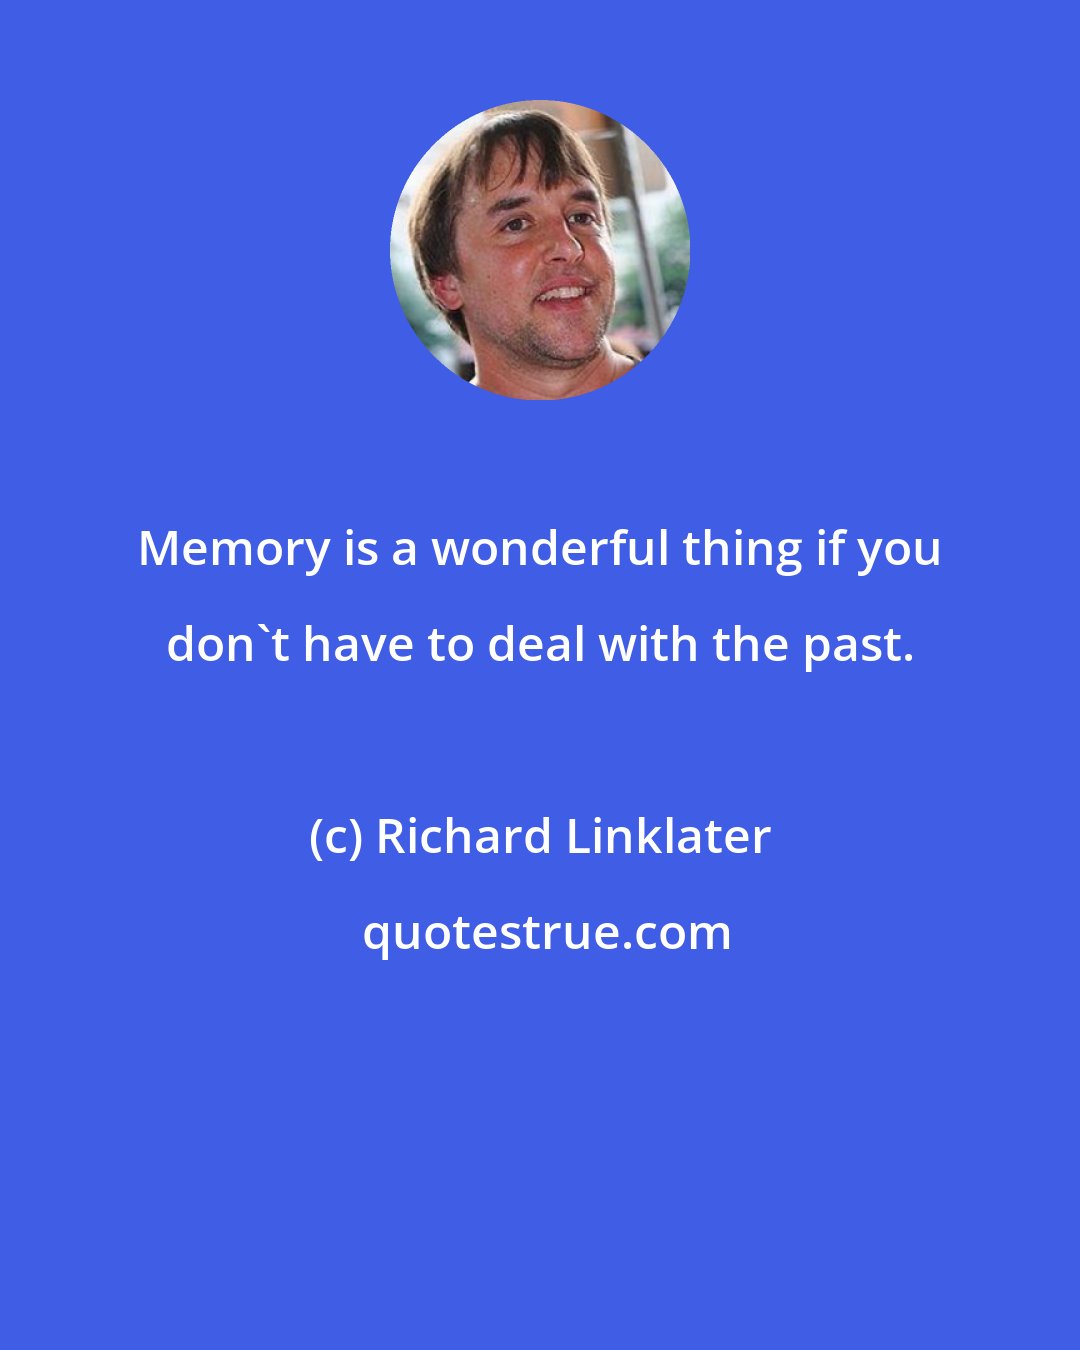 Richard Linklater: Memory is a wonderful thing if you don't have to deal with the past.